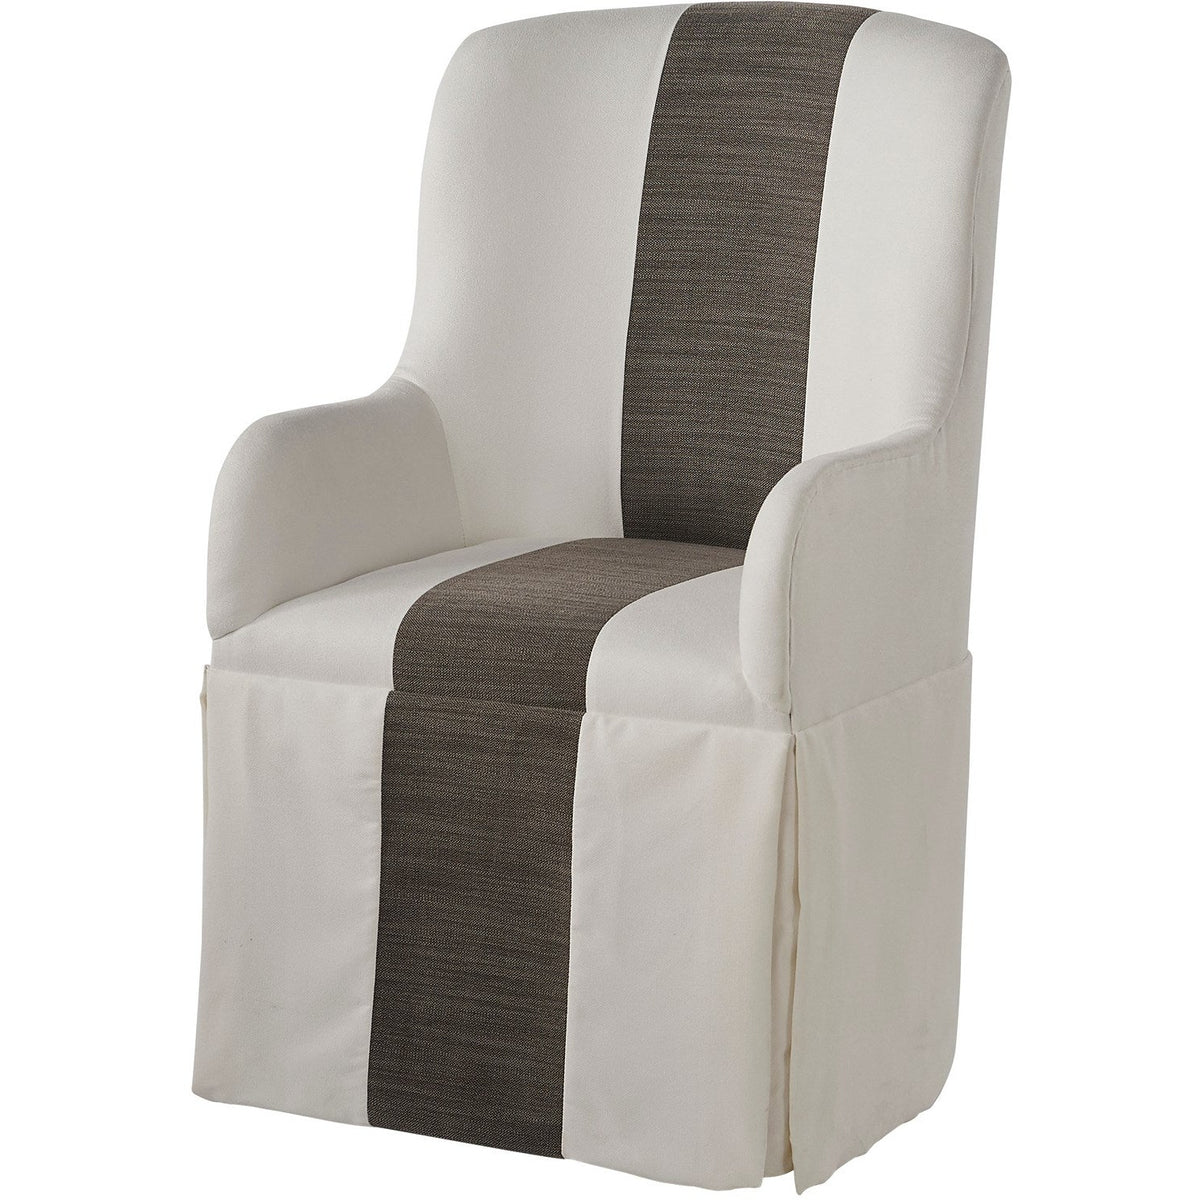 Slip Cover Caster Arm Chair - Be Bold Furniture